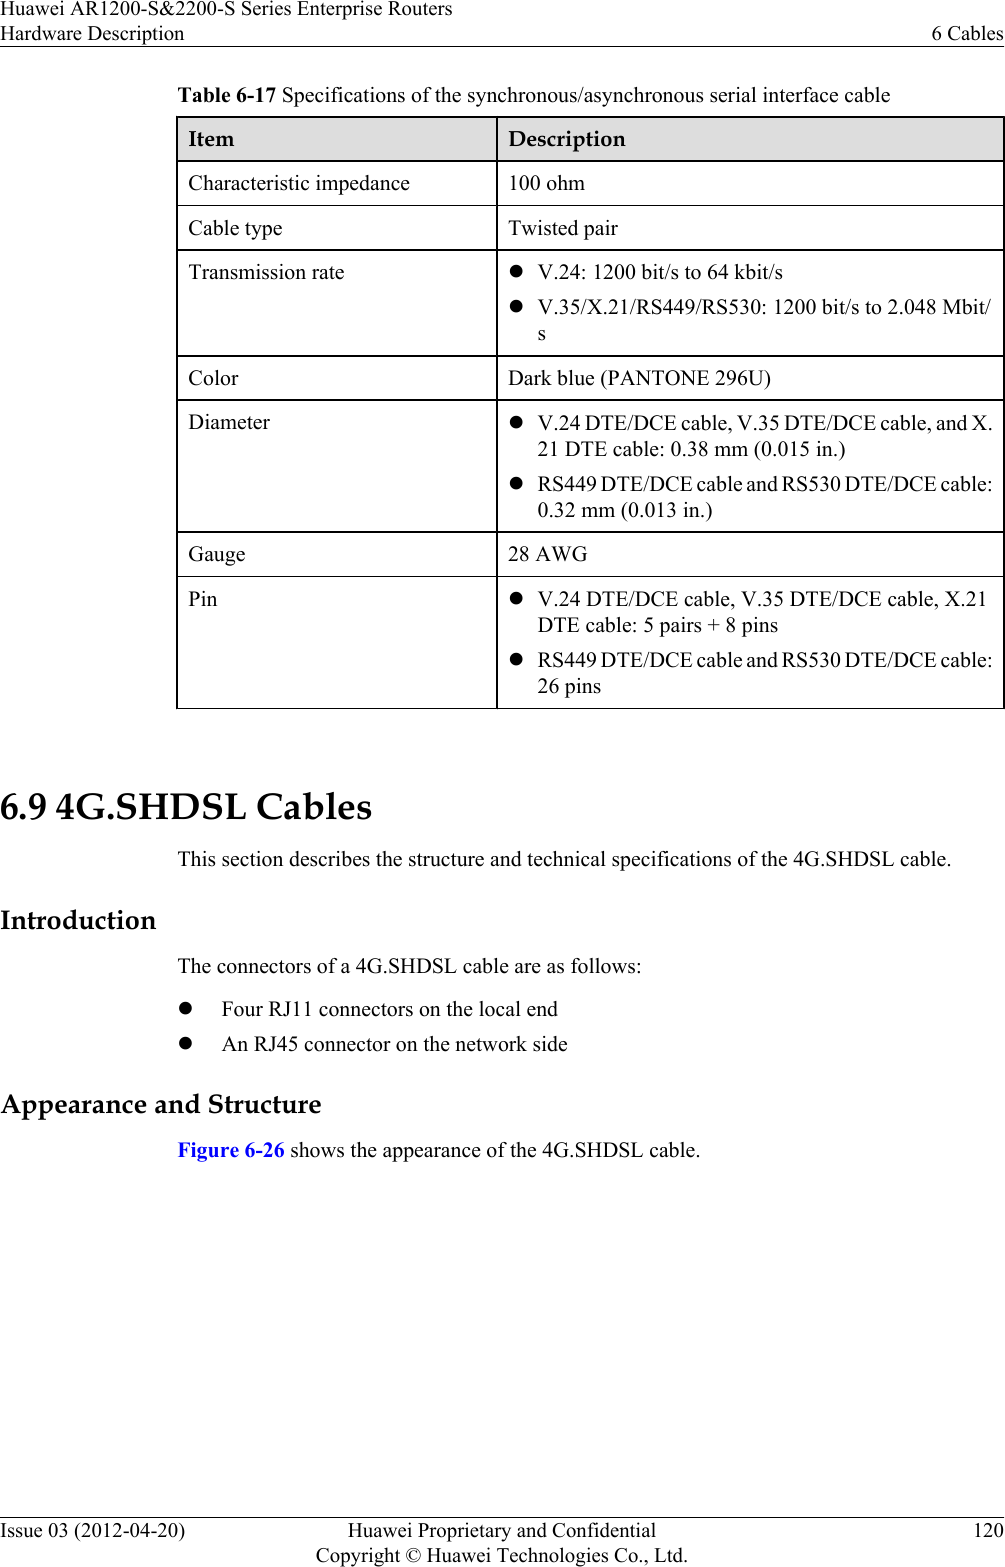 Table 6-17 Specifications of the synchronous/asynchronous serial interface cableItem DescriptionCharacteristic impedance 100 ohmCable type Twisted pairTransmission rate lV.24: 1200 bit/s to 64 kbit/slV.35/X.21/RS449/RS530: 1200 bit/s to 2.048 Mbit/sColor Dark blue (PANTONE 296U)Diameter lV.24 DTE/DCE cable, V.35 DTE/DCE cable, and X.21 DTE cable: 0.38 mm (0.015 in.)lRS449 DTE/DCE cable and RS530 DTE/DCE cable:0.32 mm (0.013 in.)Gauge 28 AWGPin lV.24 DTE/DCE cable, V.35 DTE/DCE cable, X.21DTE cable: 5 pairs + 8 pinslRS449 DTE/DCE cable and RS530 DTE/DCE cable:26 pins 6.9 4G.SHDSL CablesThis section describes the structure and technical specifications of the 4G.SHDSL cable.IntroductionThe connectors of a 4G.SHDSL cable are as follows:lFour RJ11 connectors on the local endlAn RJ45 connector on the network sideAppearance and StructureFigure 6-26 shows the appearance of the 4G.SHDSL cable.Huawei AR1200-S&amp;2200-S Series Enterprise RoutersHardware Description 6 CablesIssue 03 (2012-04-20) Huawei Proprietary and ConfidentialCopyright © Huawei Technologies Co., Ltd.120